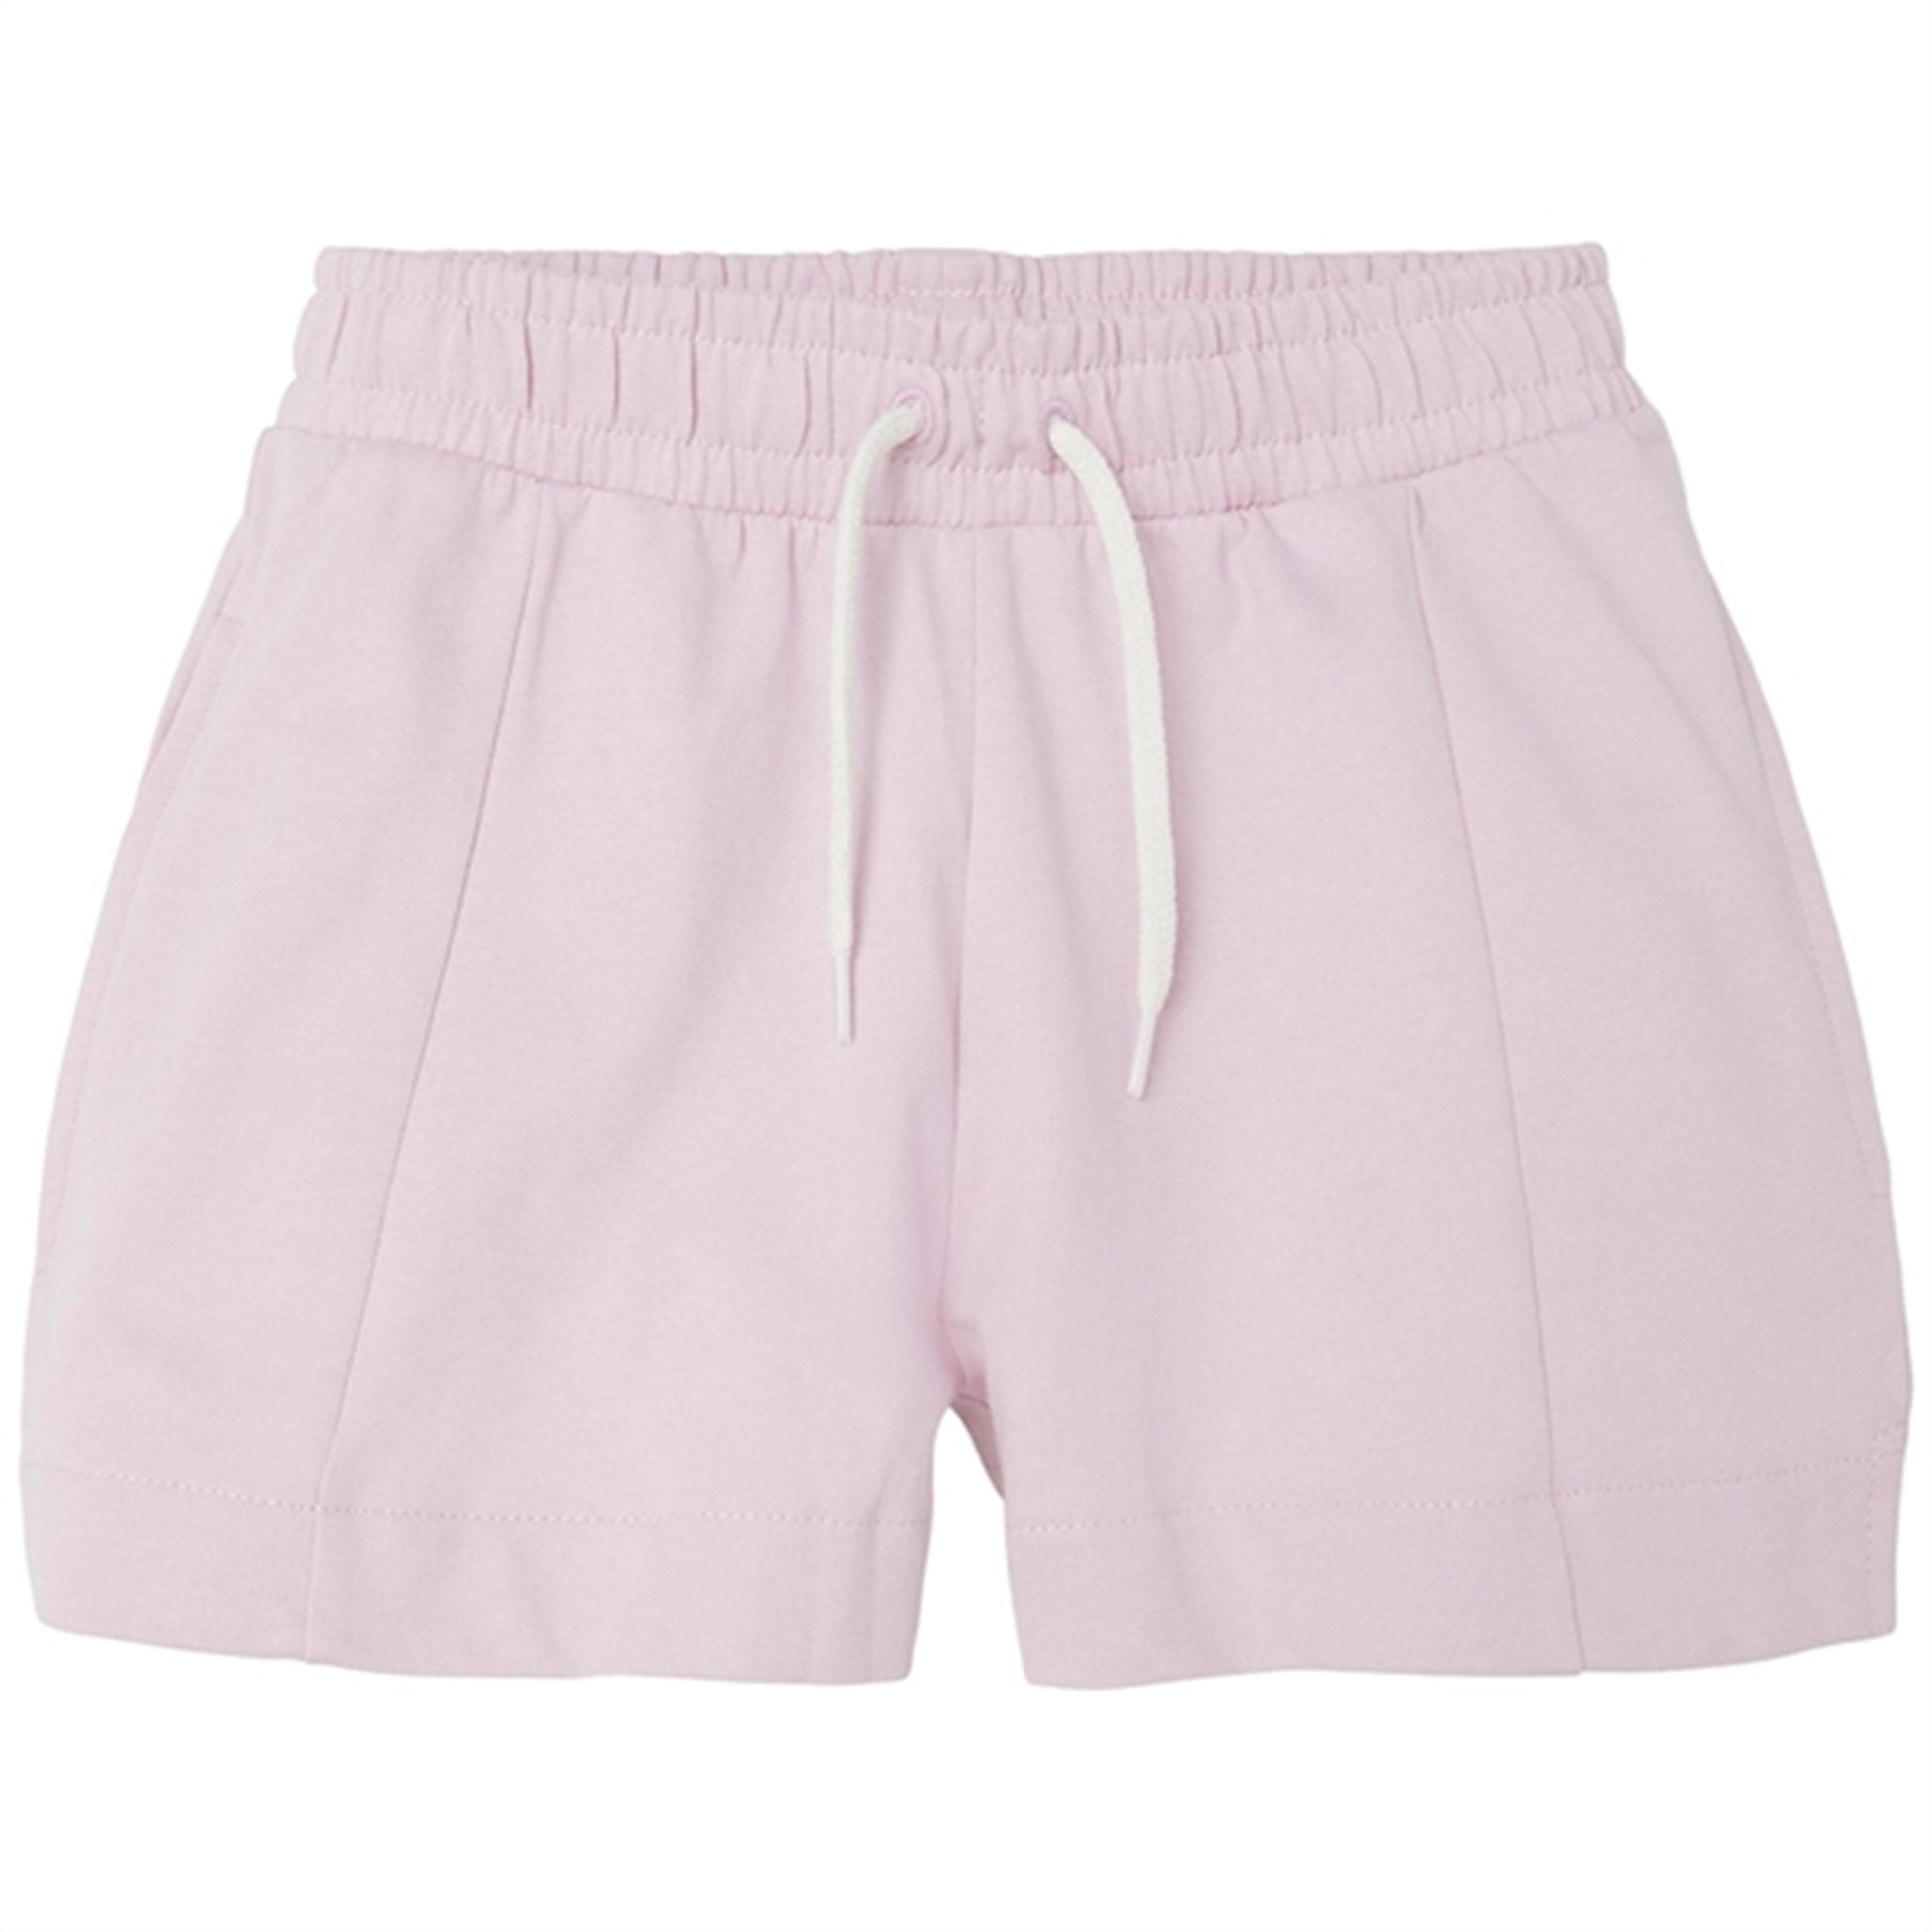 Name it Winsome Orchid Nukka Sweat Shorts